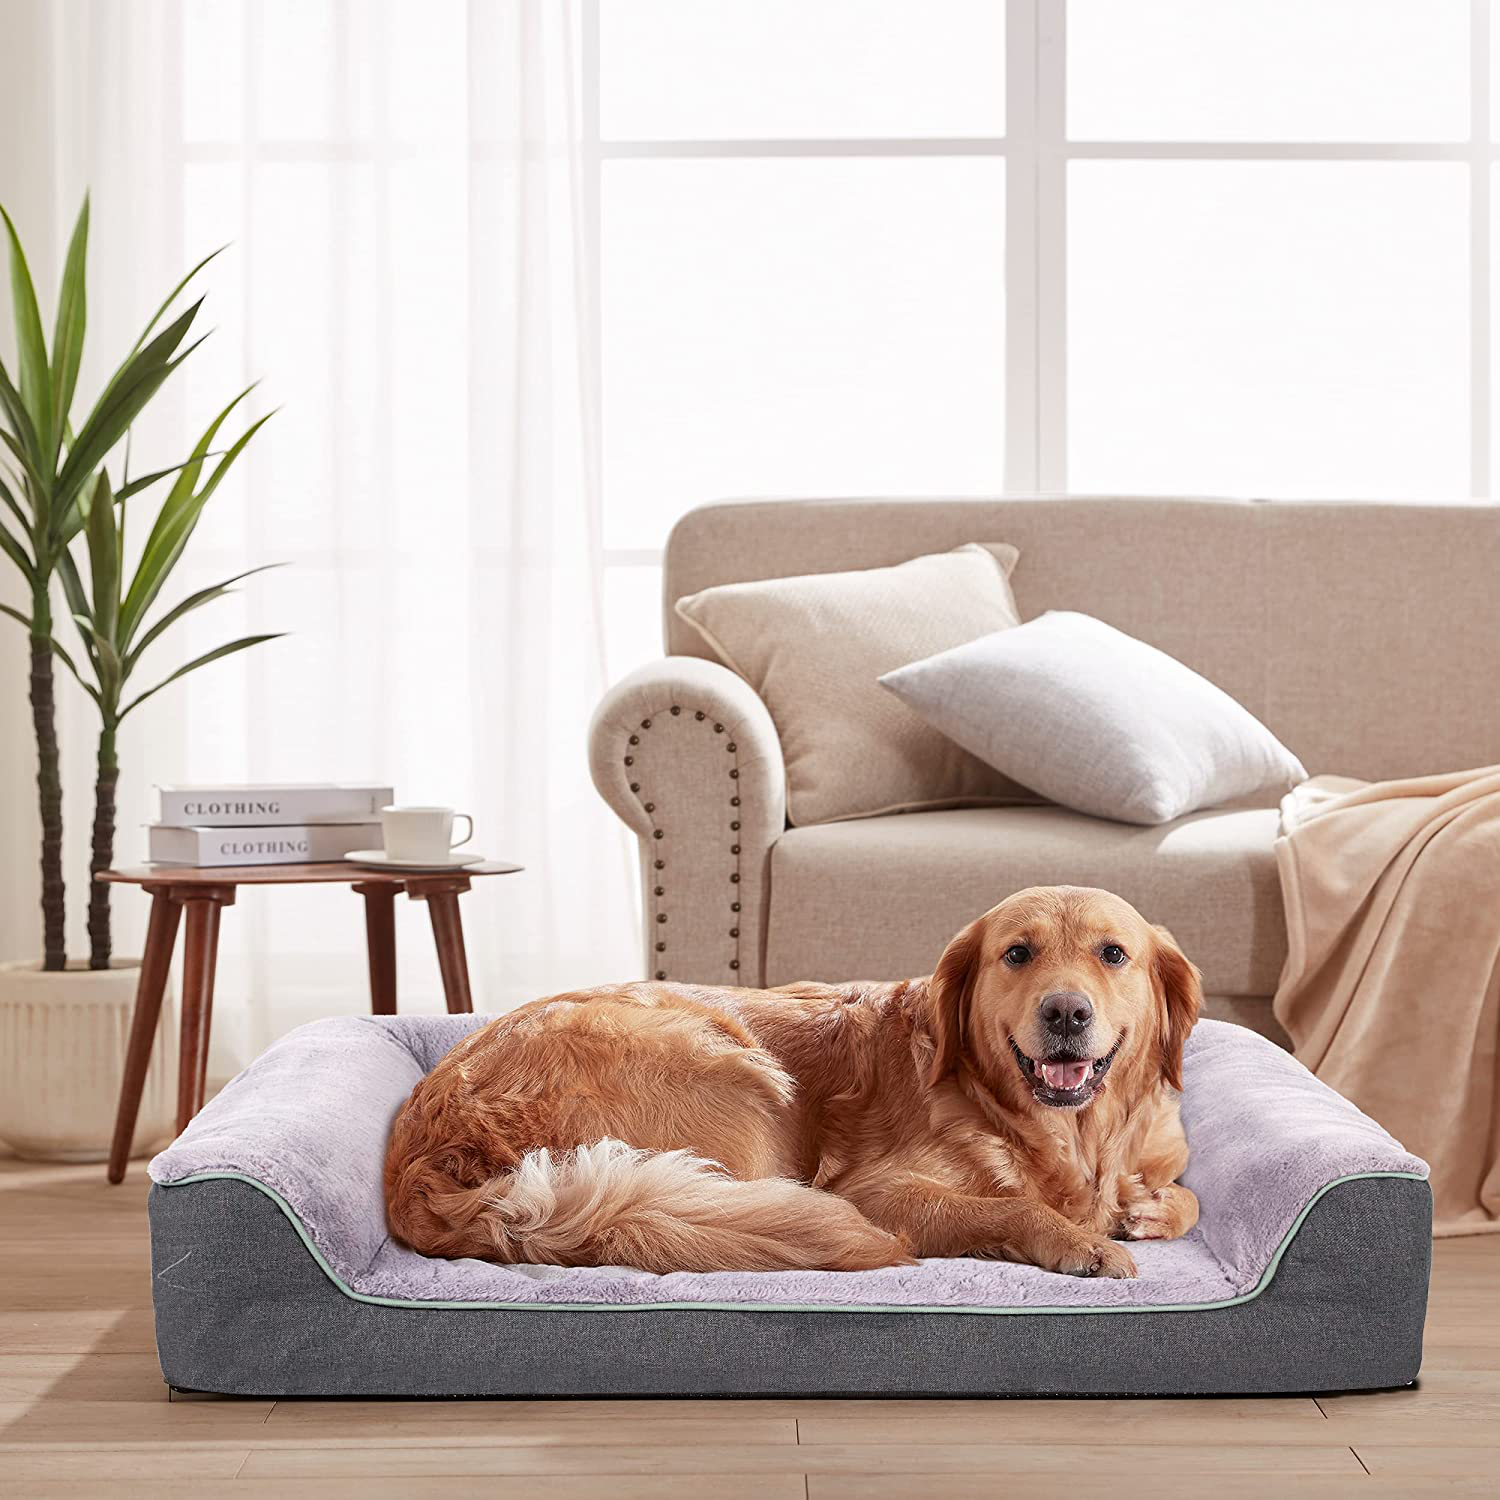 WATANIYA PET Orthopedic Dog Bed - Waterproof Dog Foam Sofa with Removable Washable Cover, Thick Bolster Rim - Couch Dog Bed for Small Medium Large Dogs